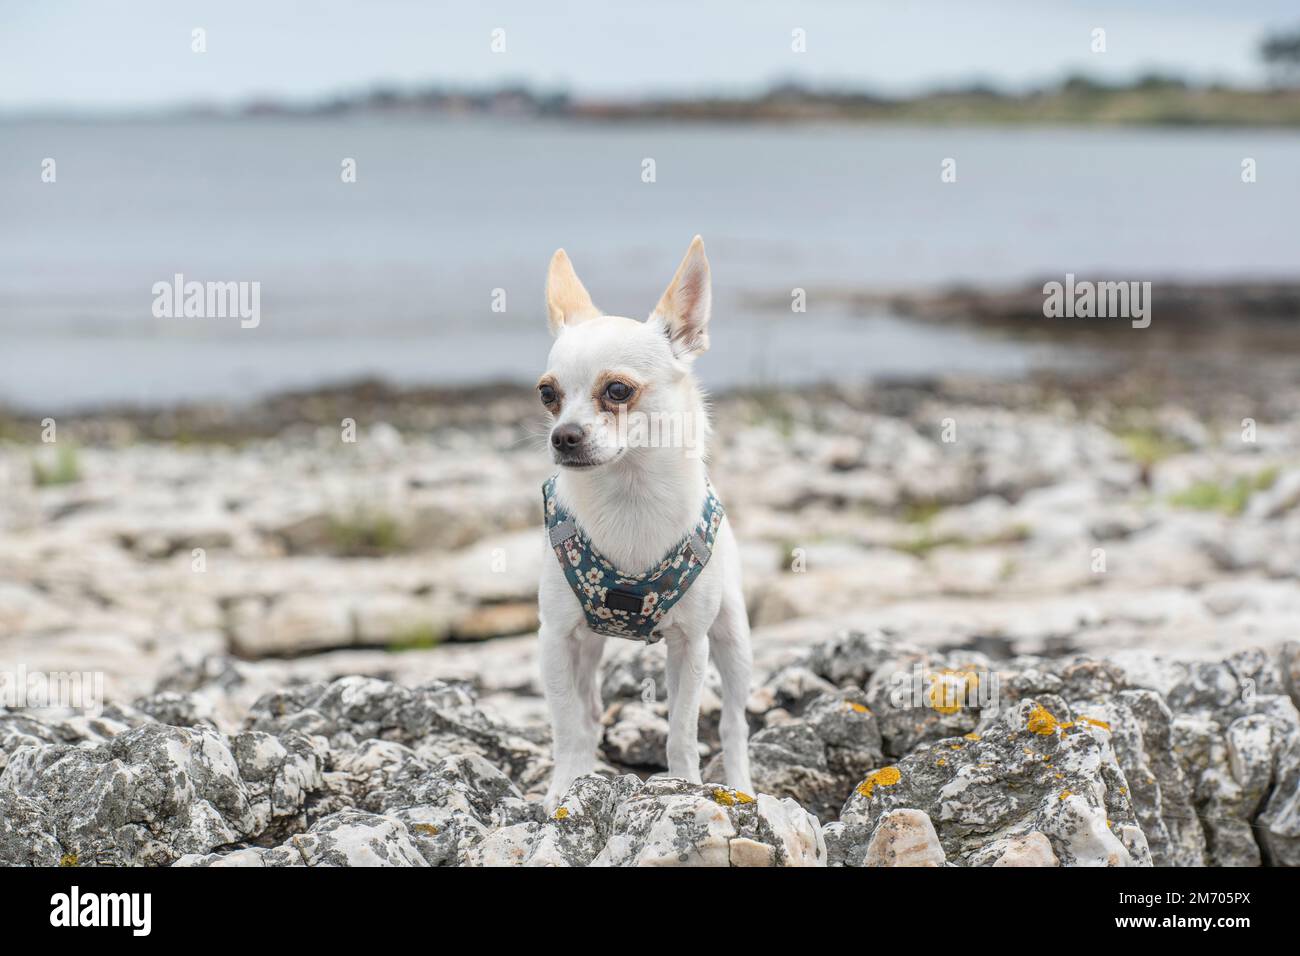 A white chihuahua standing on a beach with a harness Stock Photo